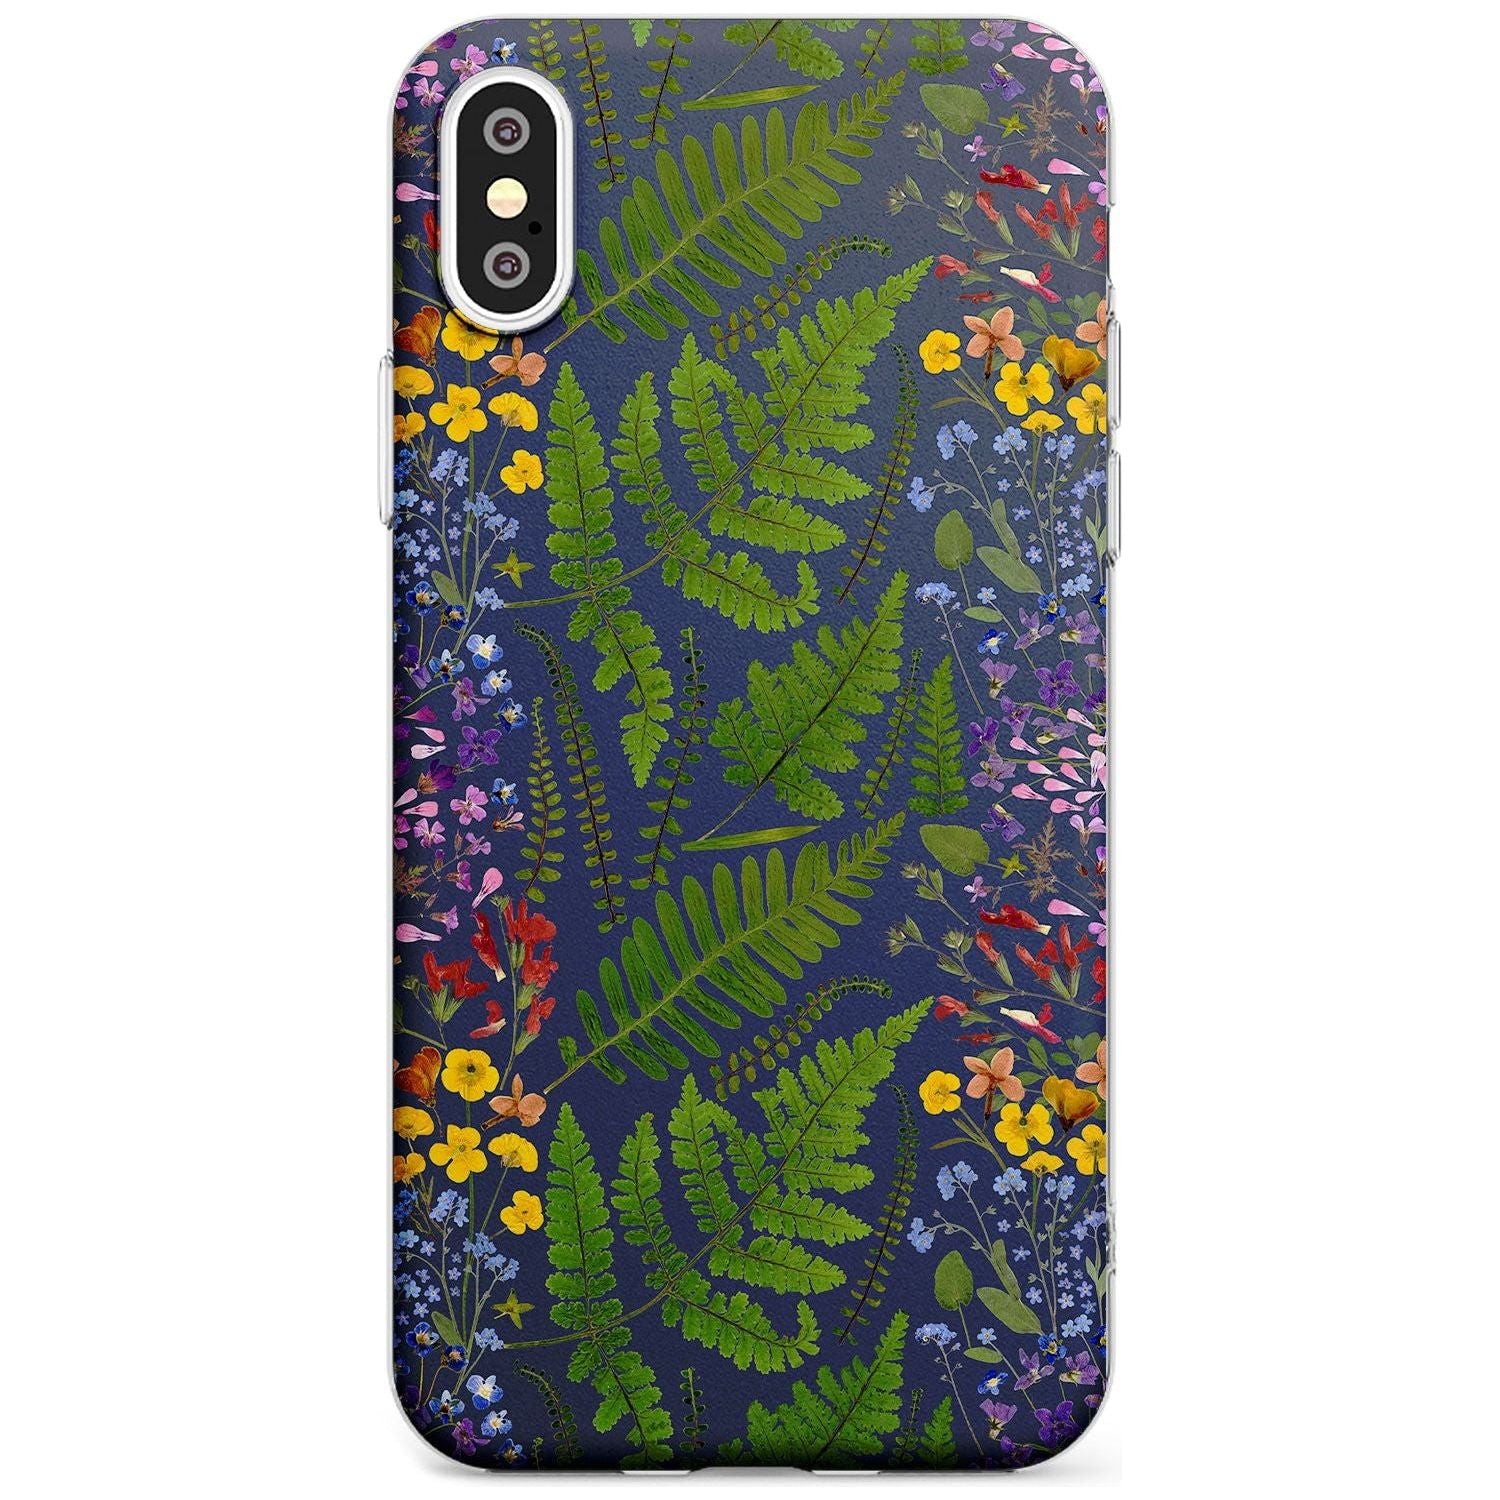 Busy Floral and Fern Design - Navy Slim TPU Phone Case Warehouse X XS Max XR